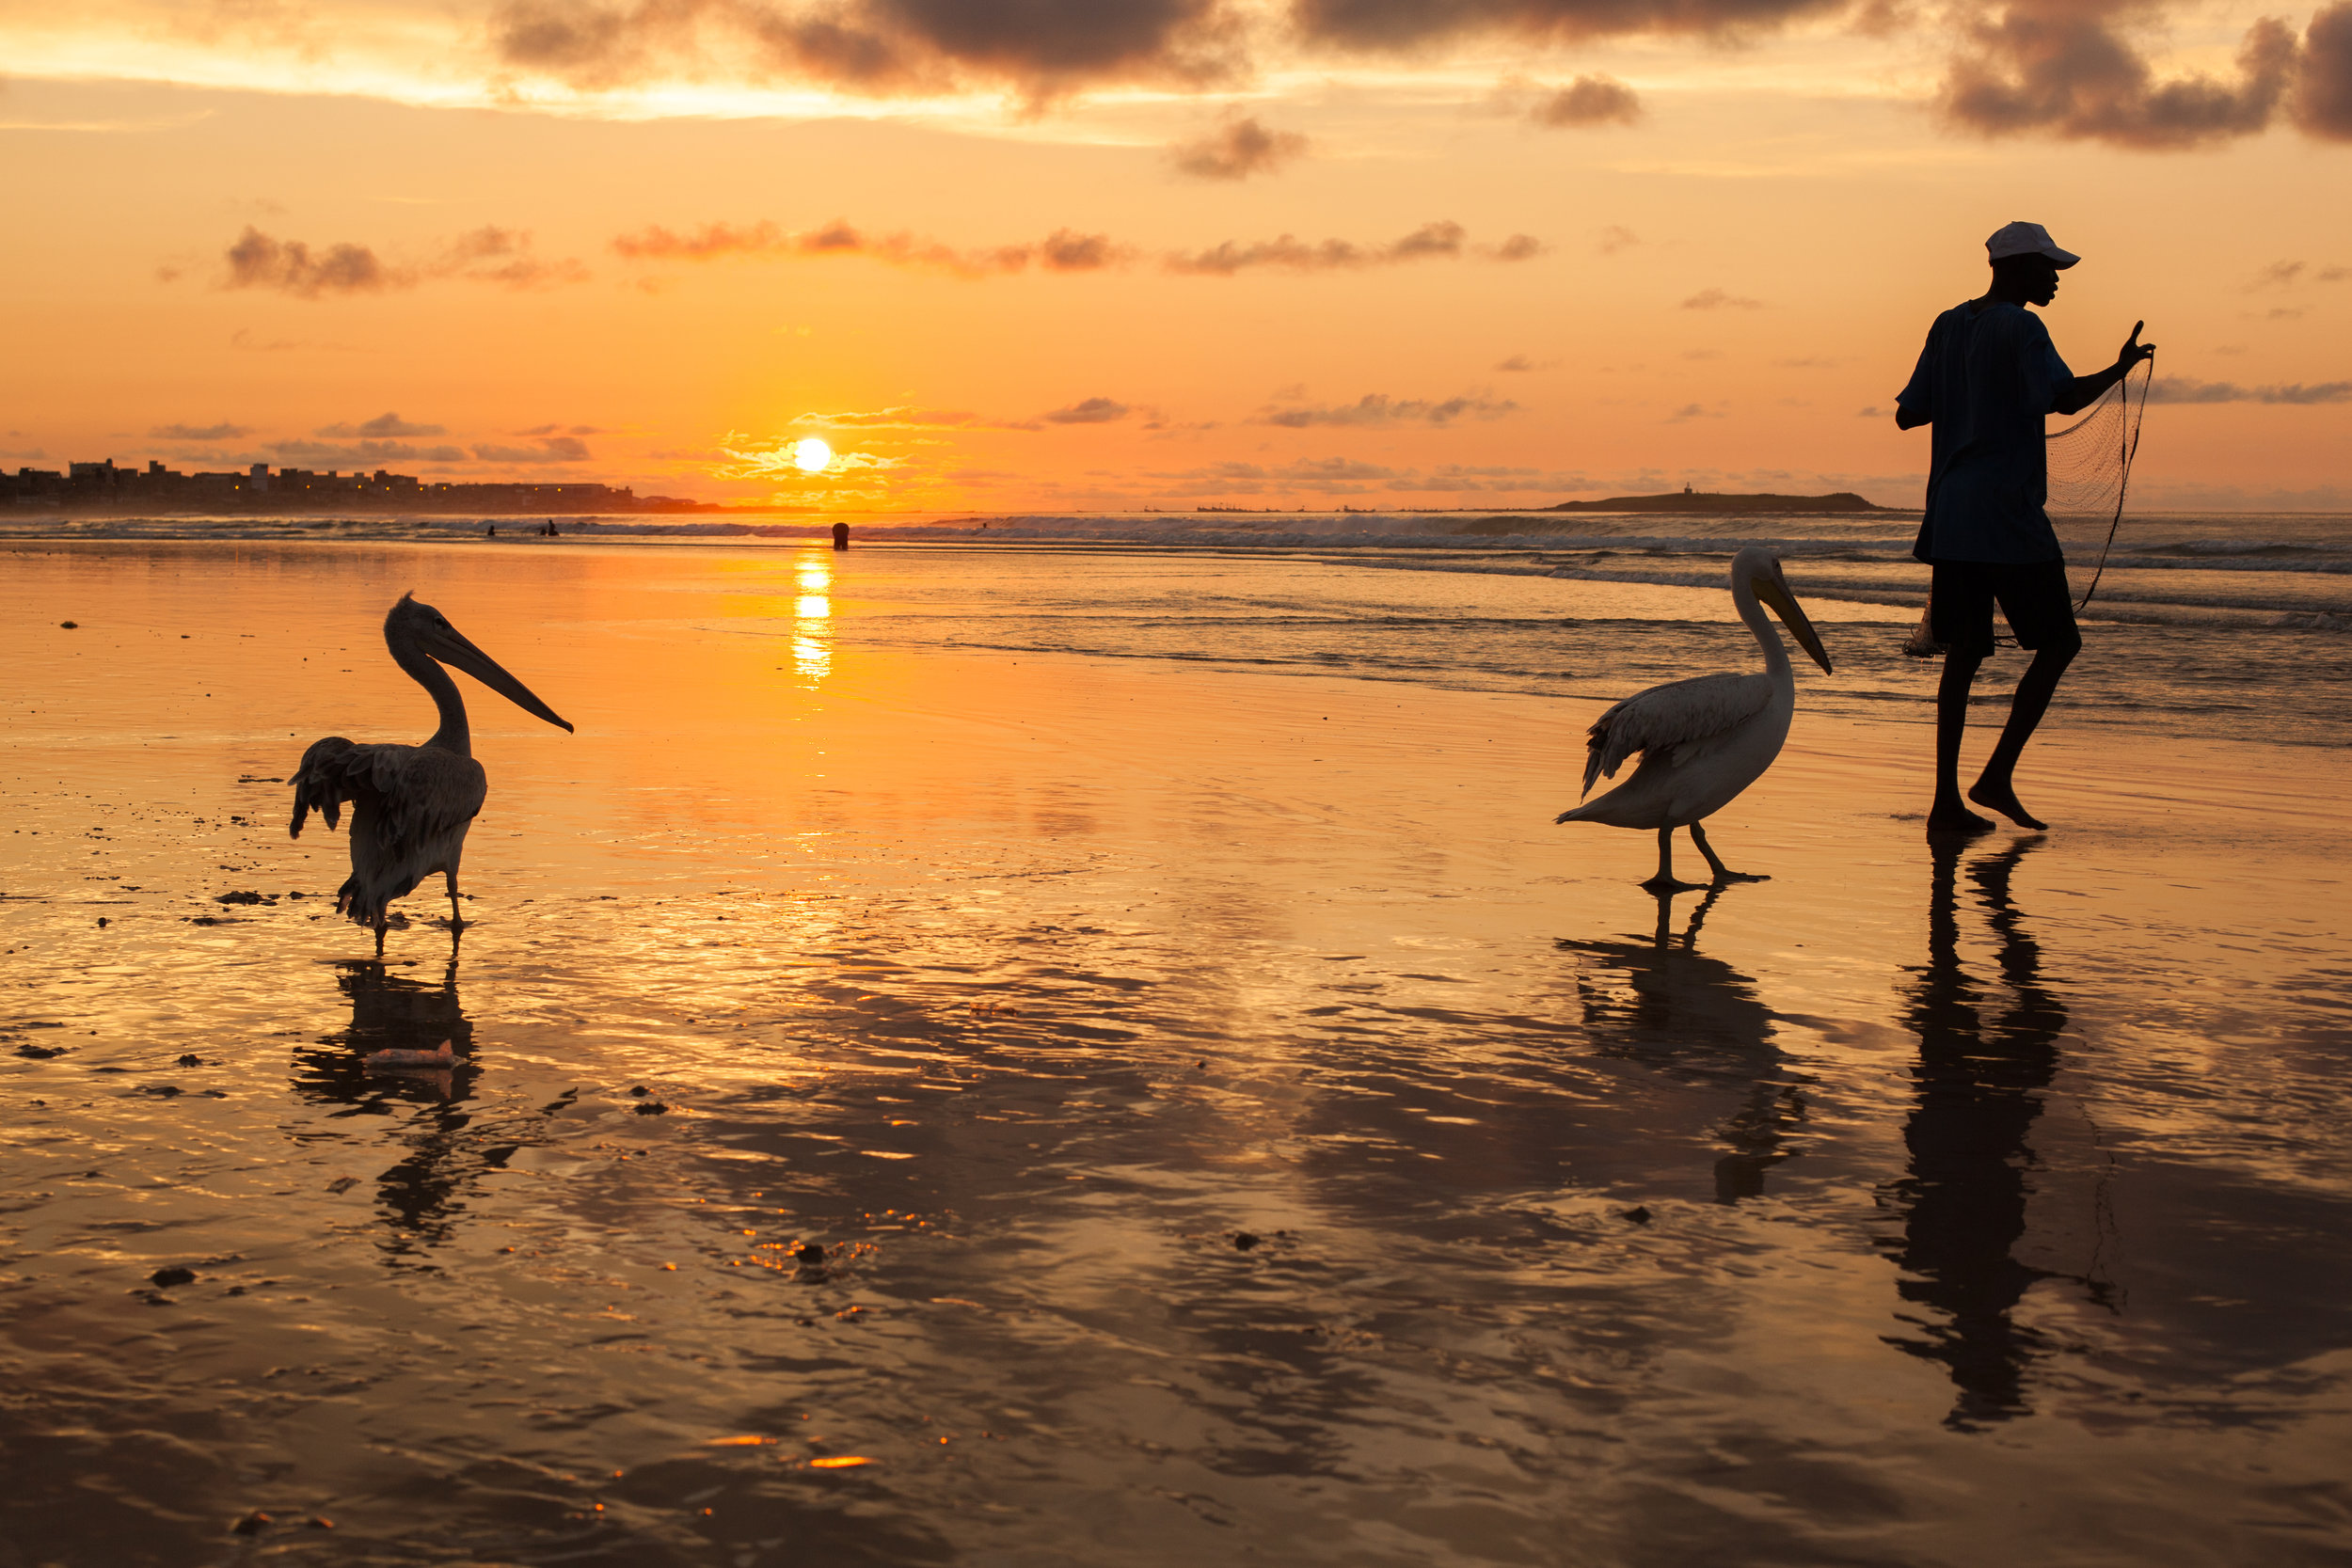 A fishermen and his pelicans at sunset in Senegal, West Africa.